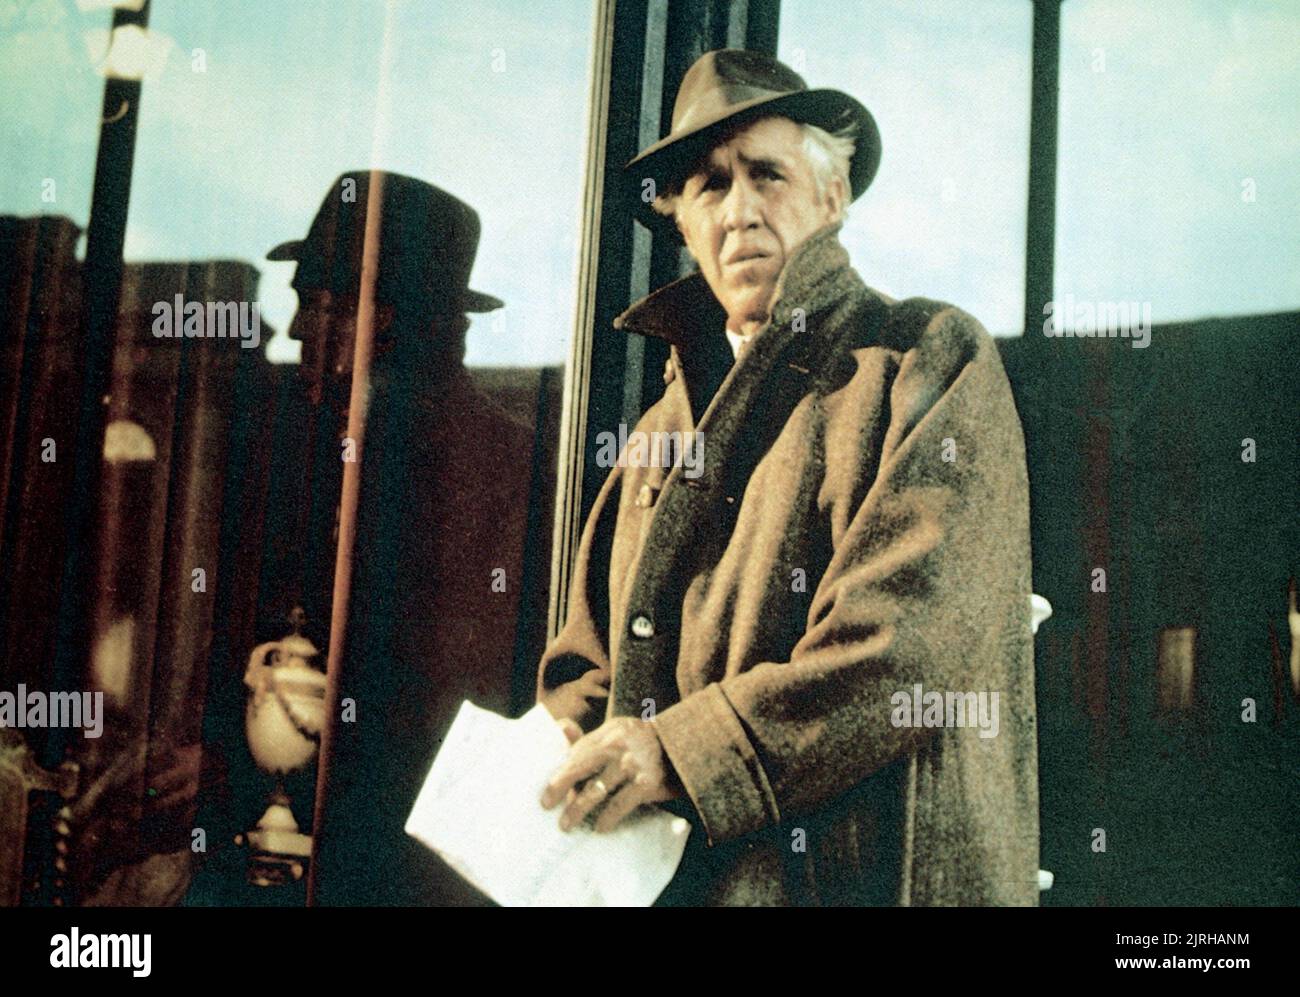 JASON ROBARDS, SOMETHING WICKED THIS WAY COMES, 1983 Stock Photo